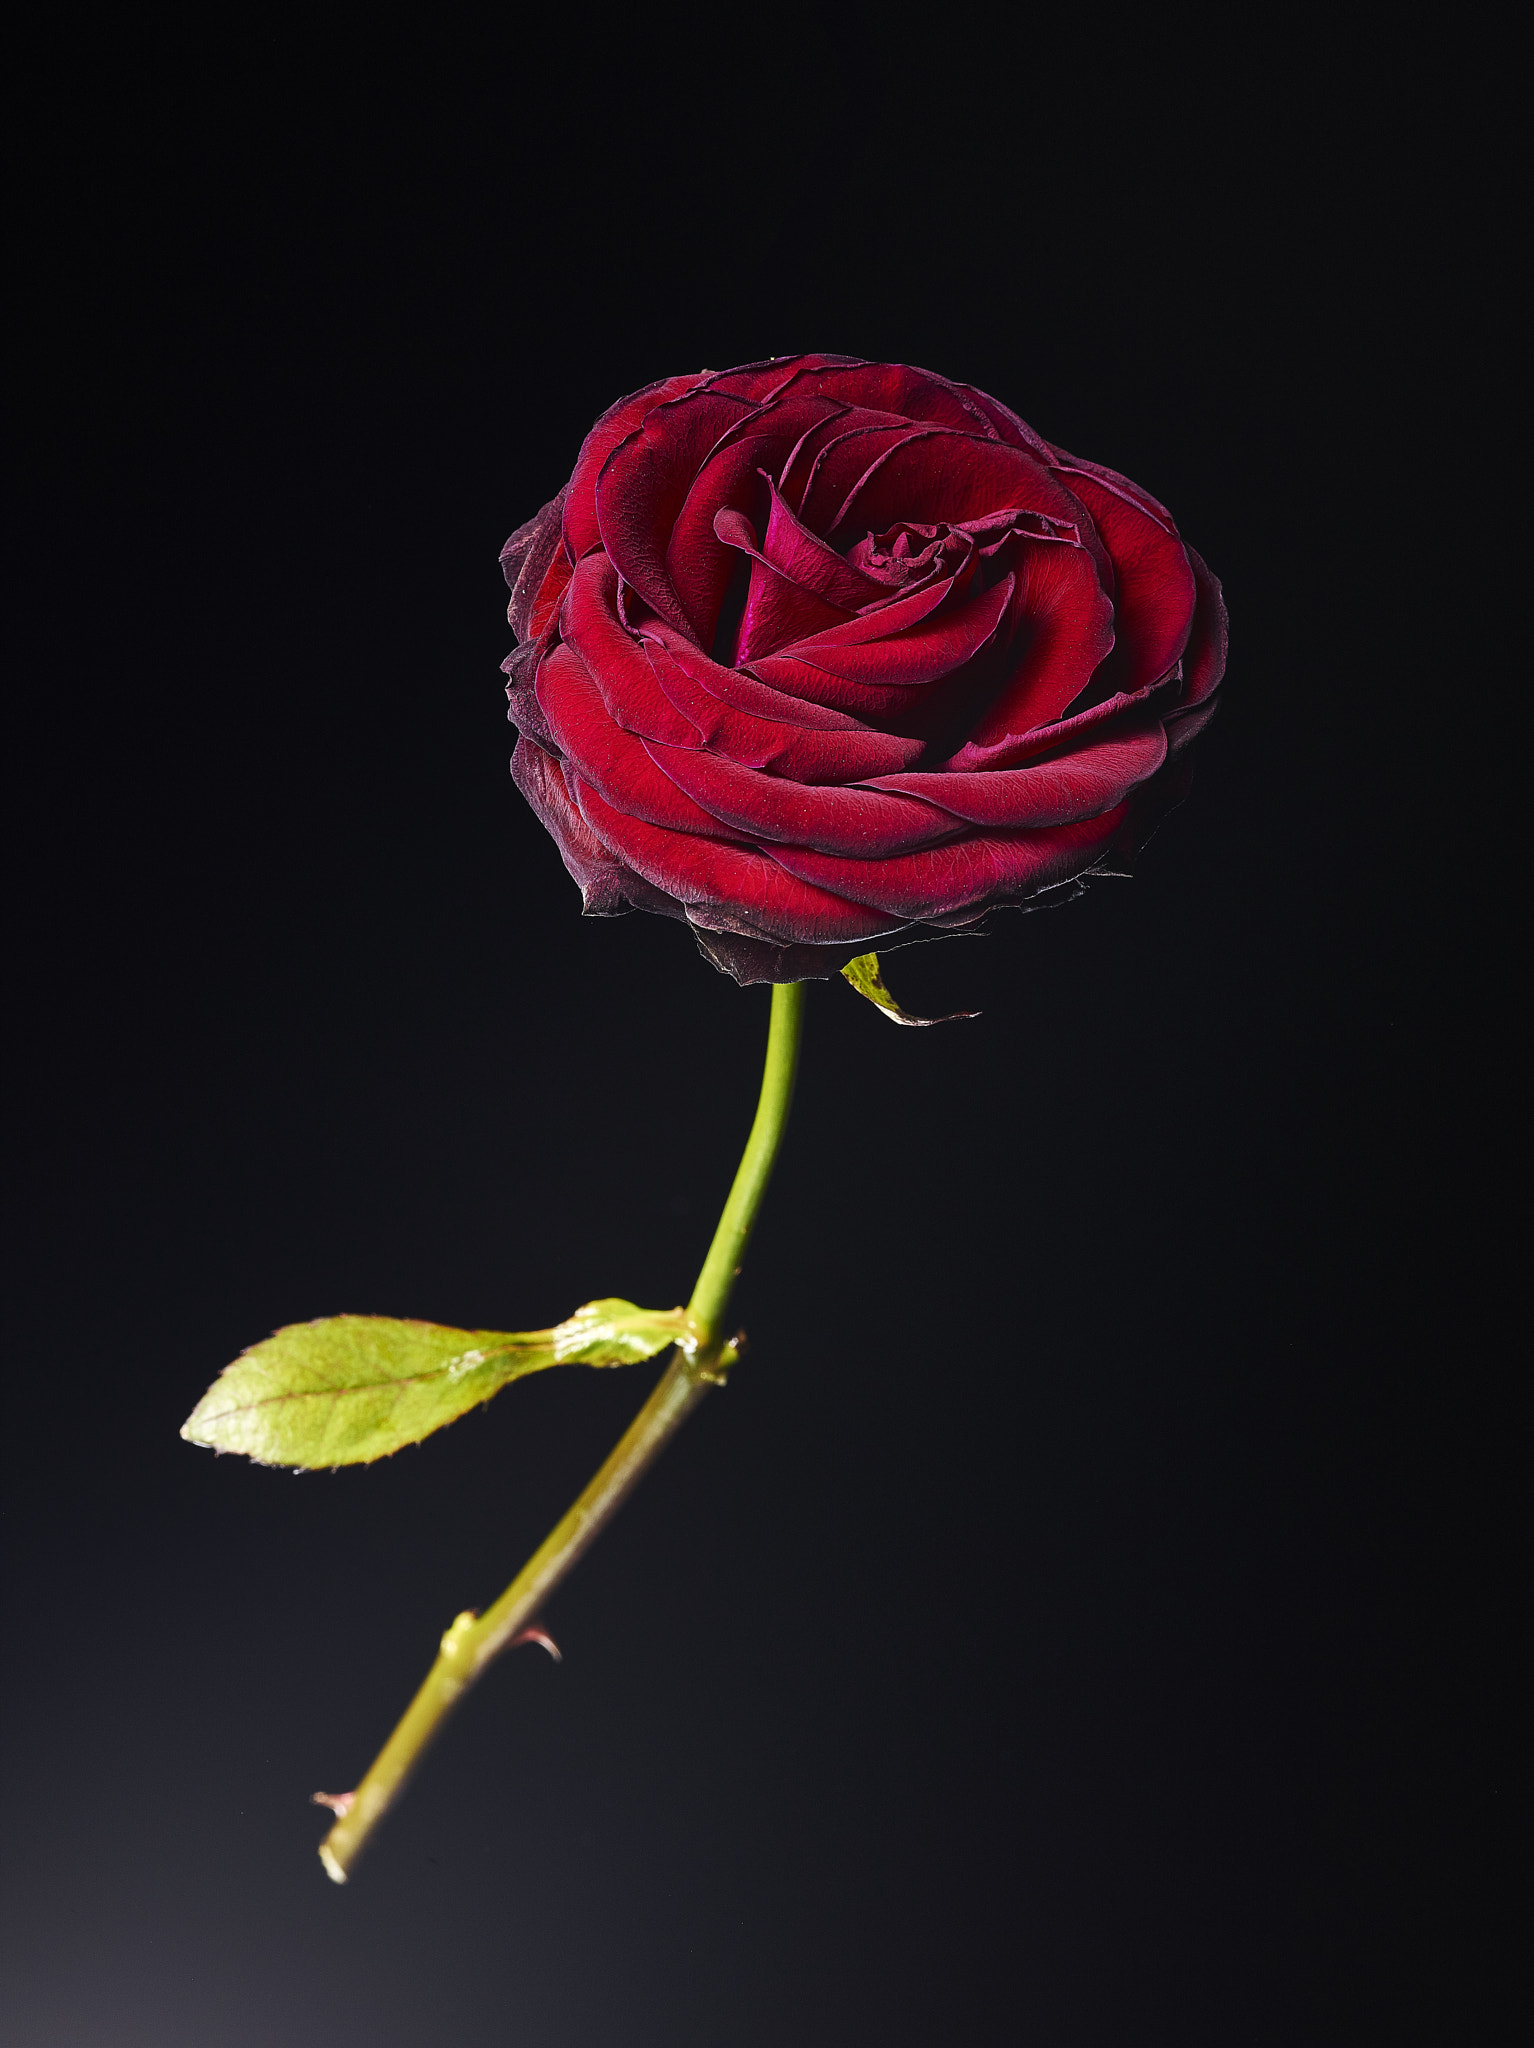 Phase One IQ140 + Schneider LS 120mm f/4.0 sample photo. Red rose photography